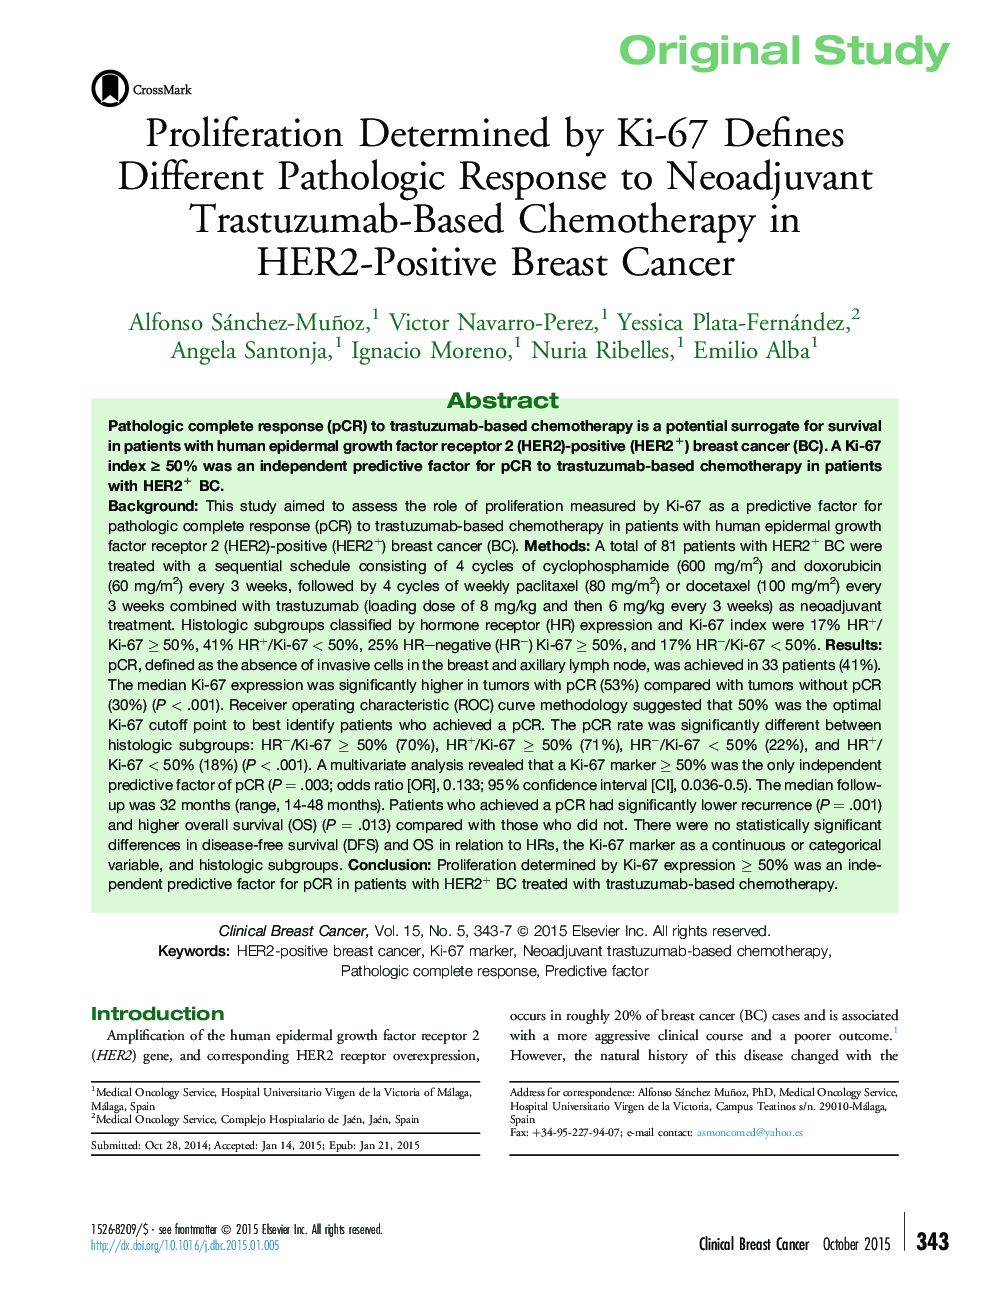 Proliferation Determined by Ki-67 Defines Different Pathologic Response to Neoadjuvant Trastuzumab-Based Chemotherapy in HER2-Positive Breast Cancer